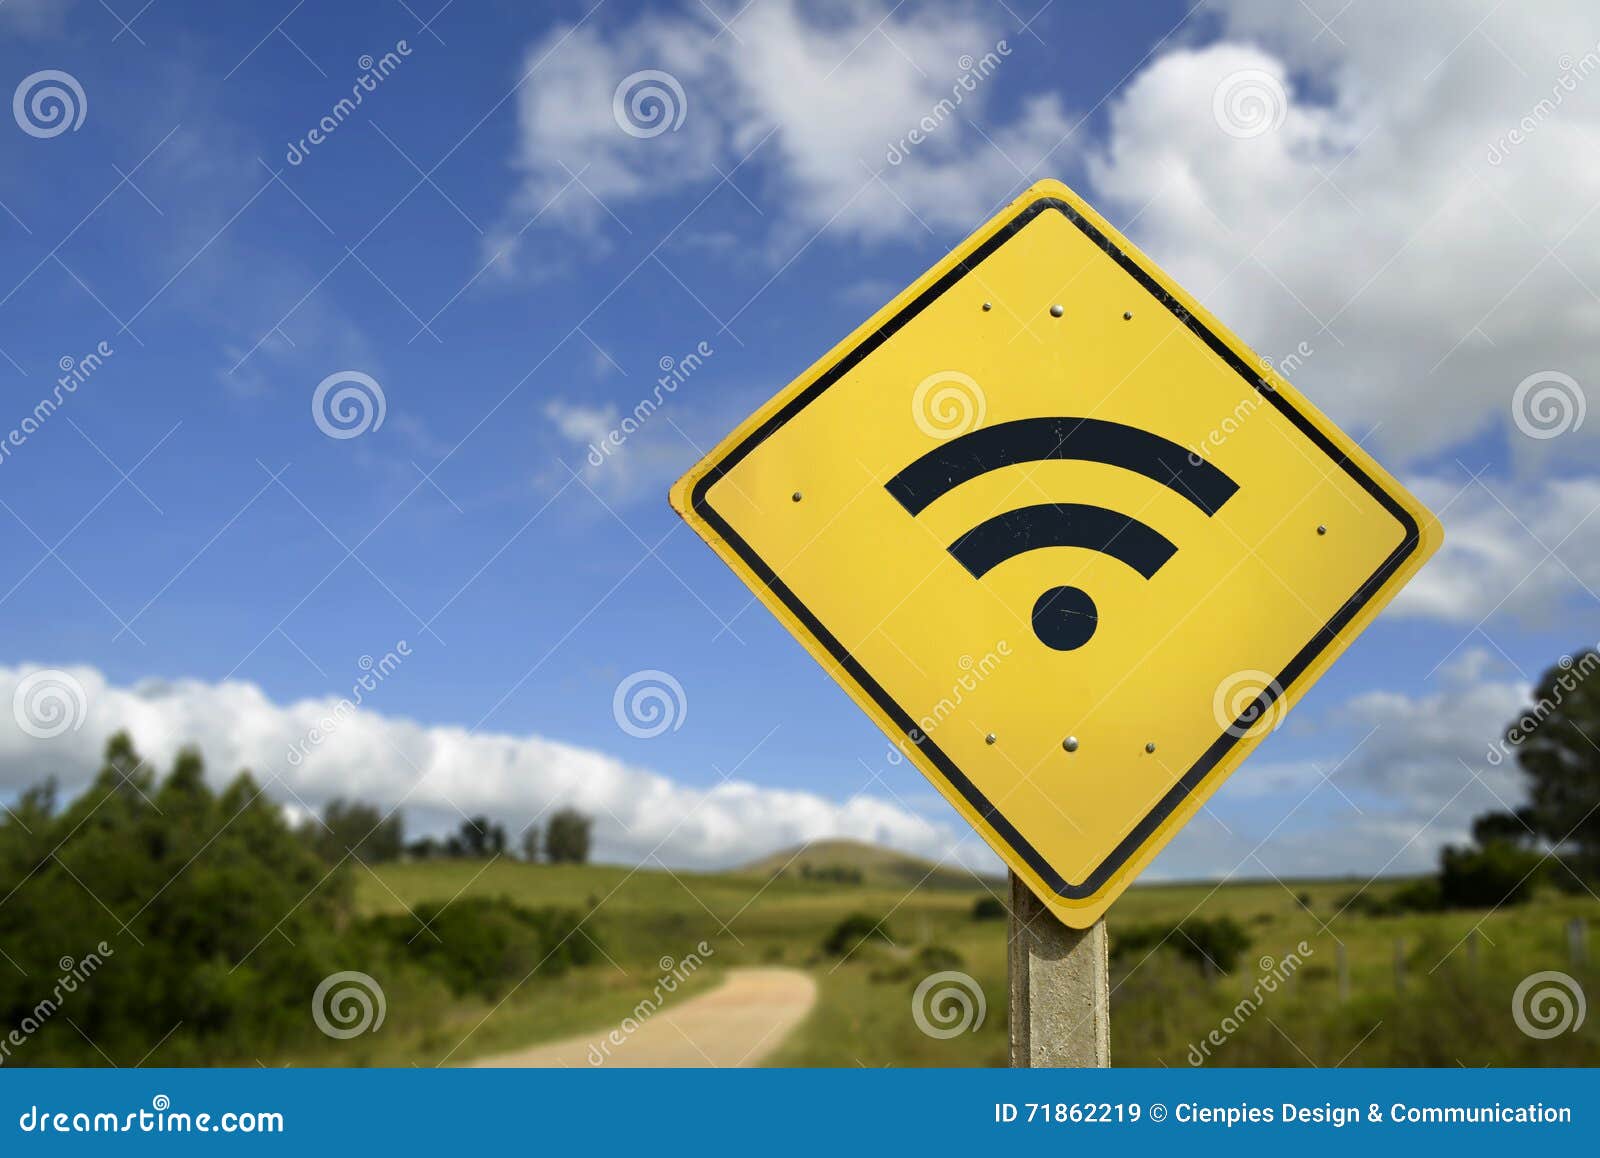 wifi access road sign concept in rural area